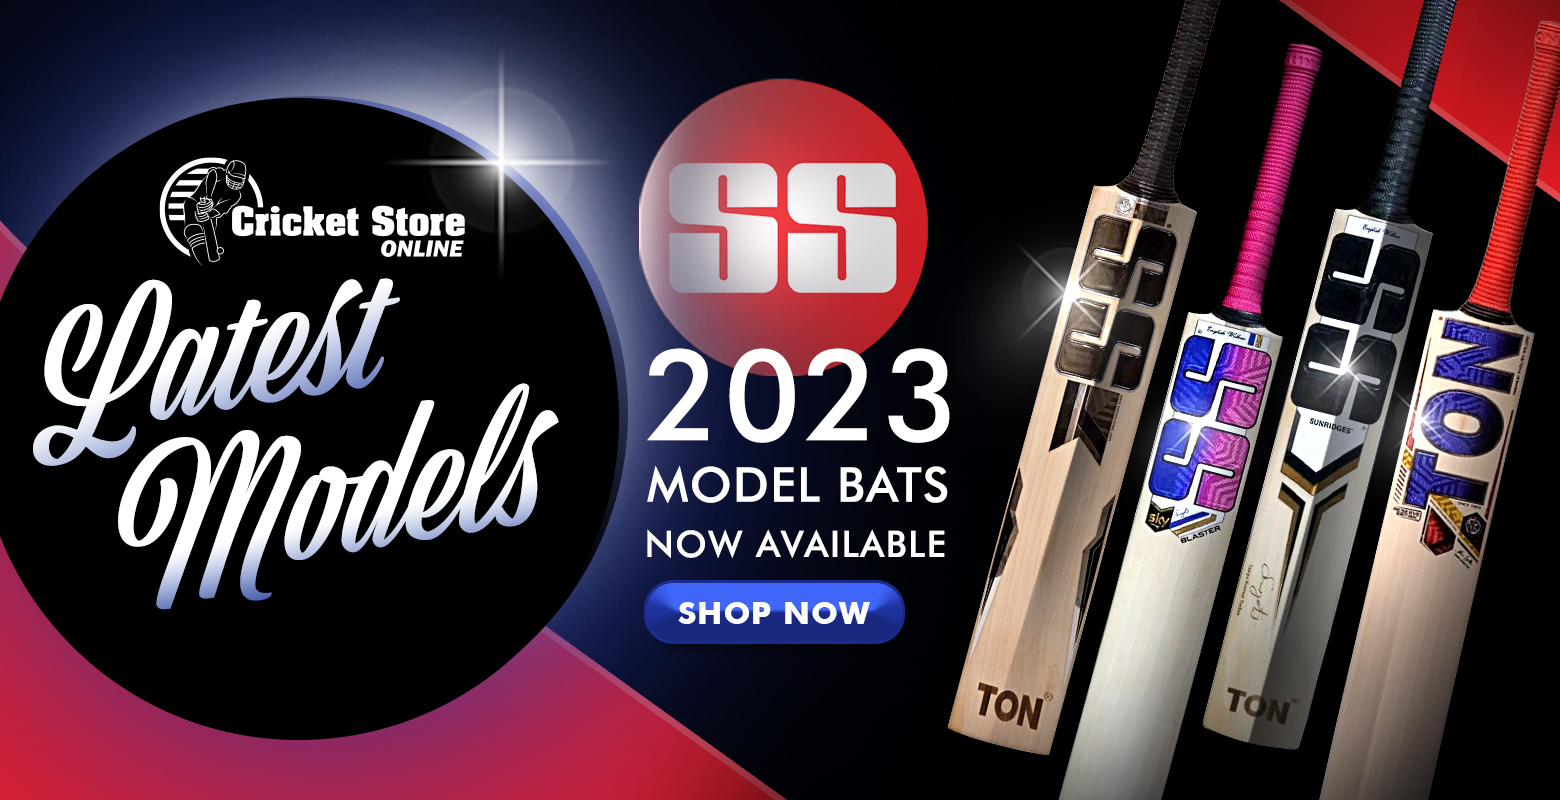 ICC Cricket Store - Official Online Shop of International Cricket Council